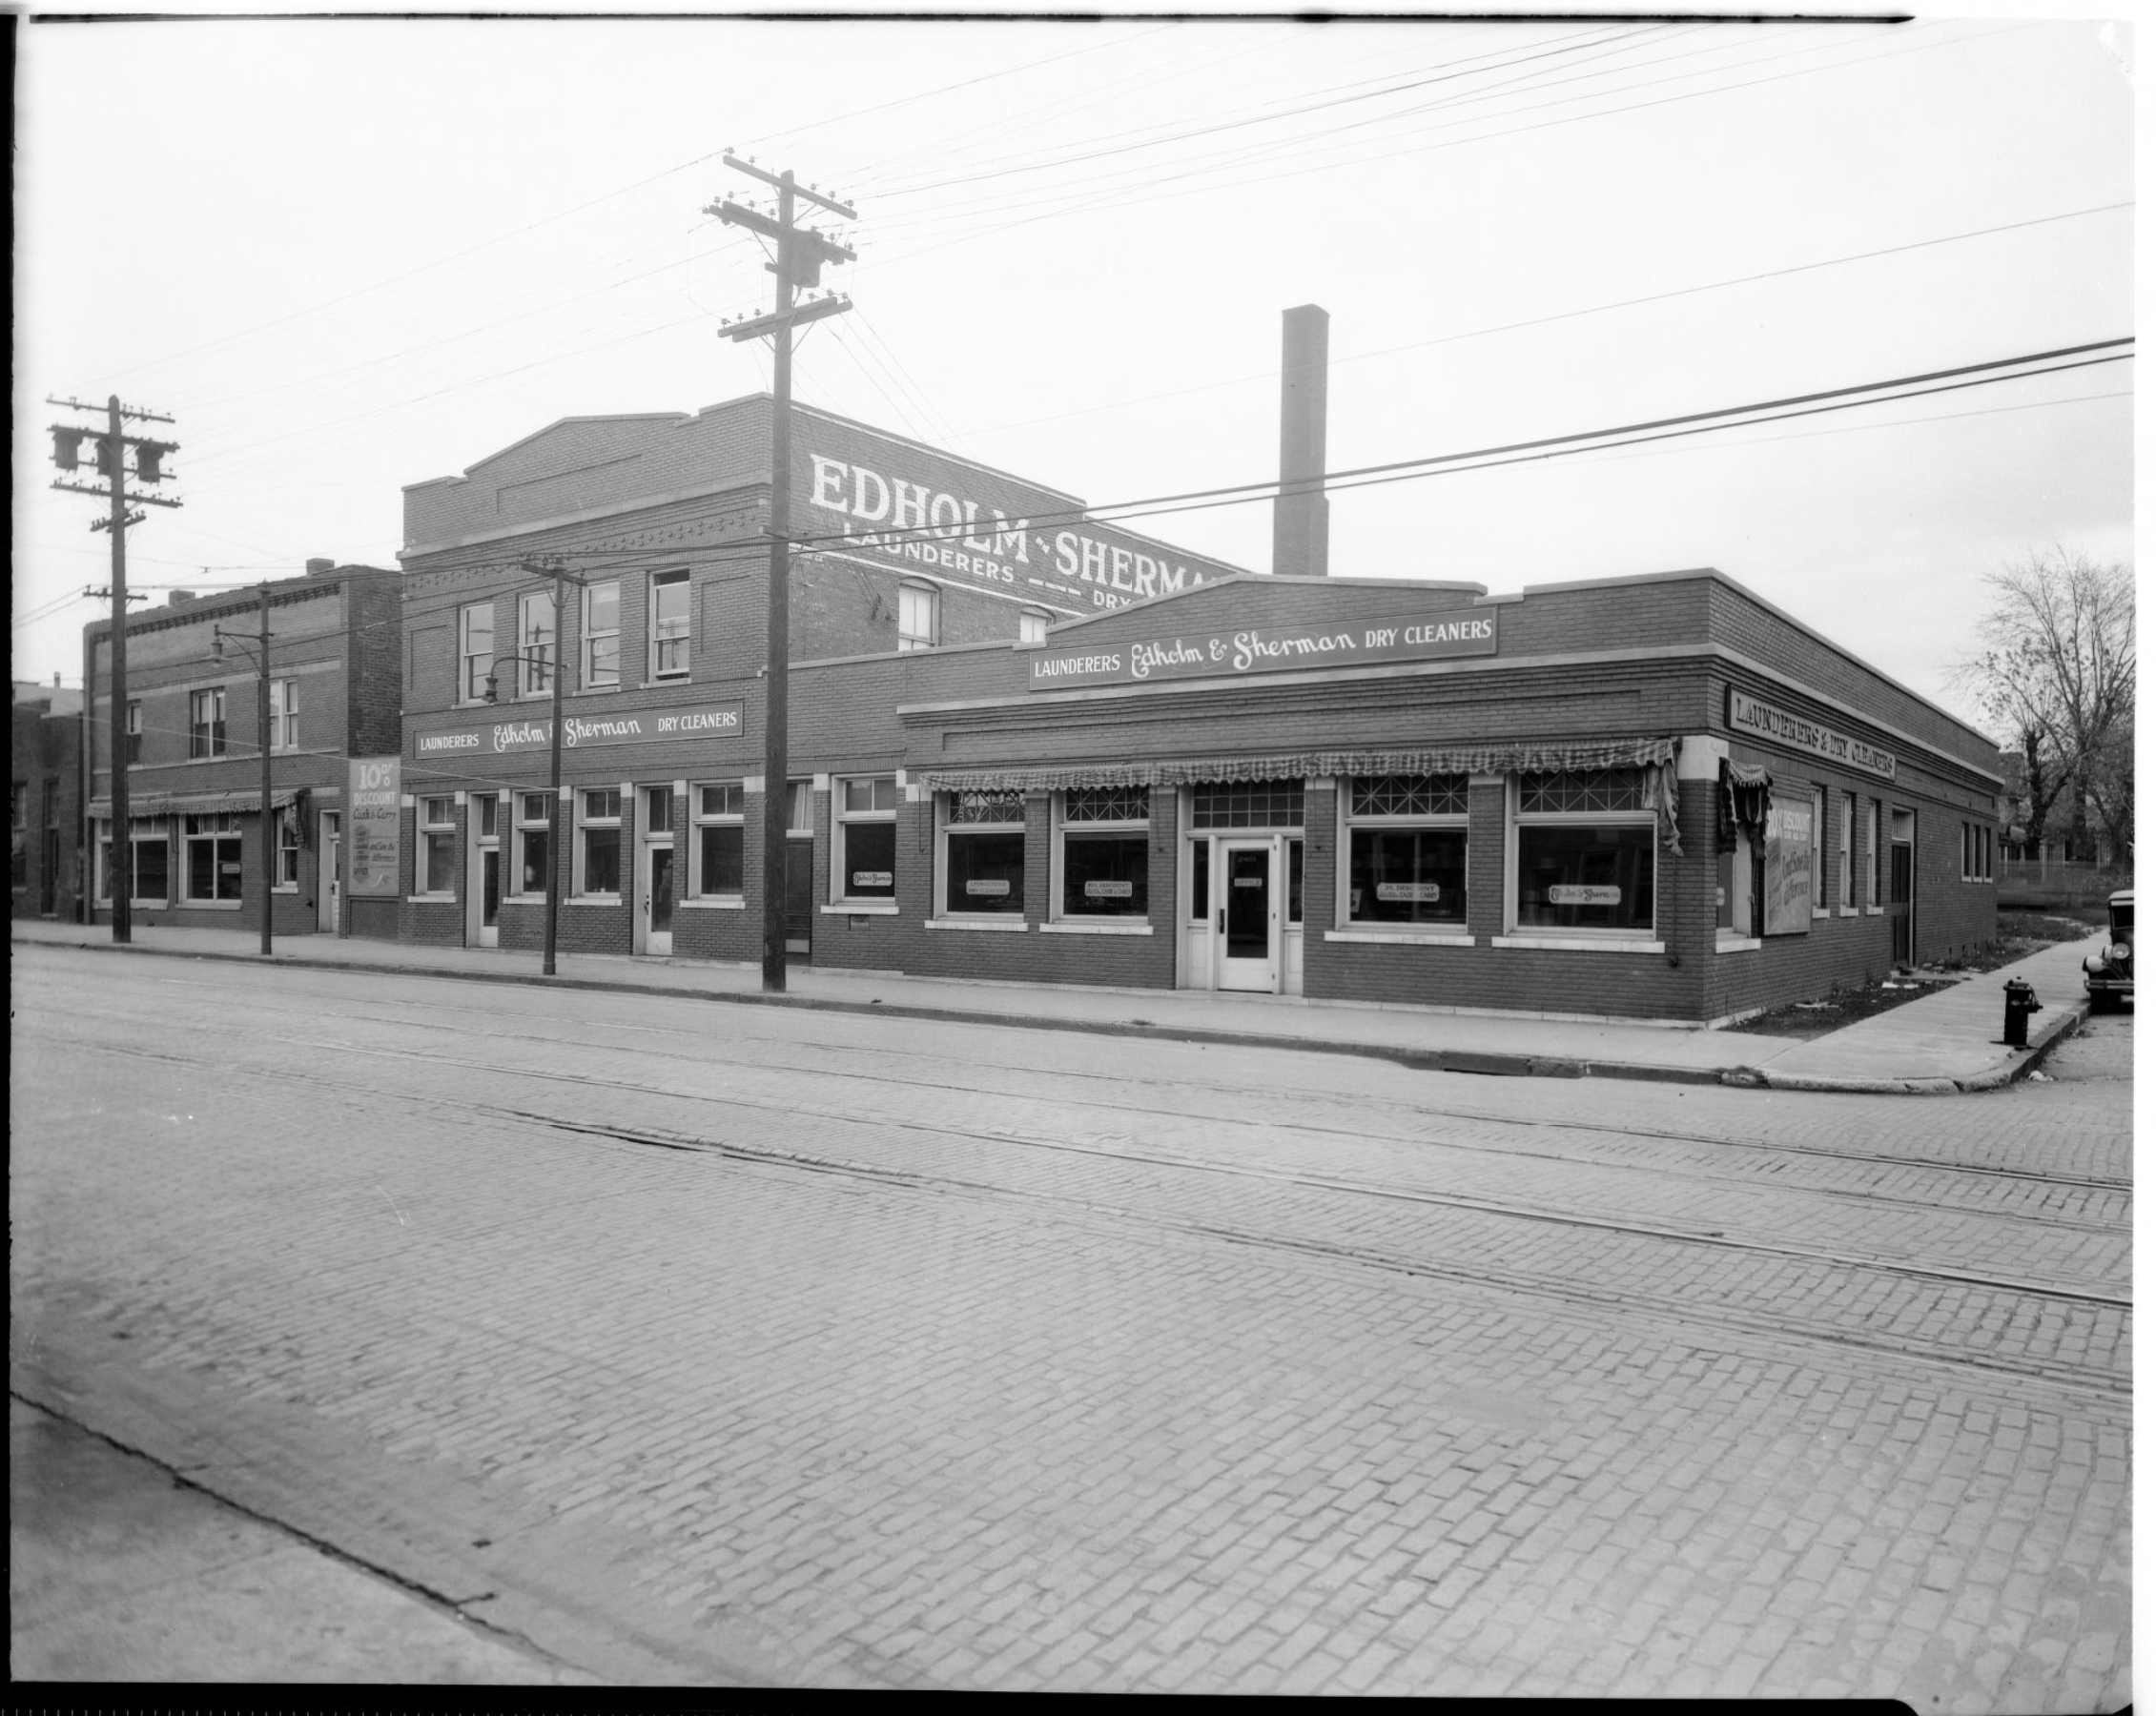 FJ Carey Block Building as seen in 1920s with a brick 24th street in front